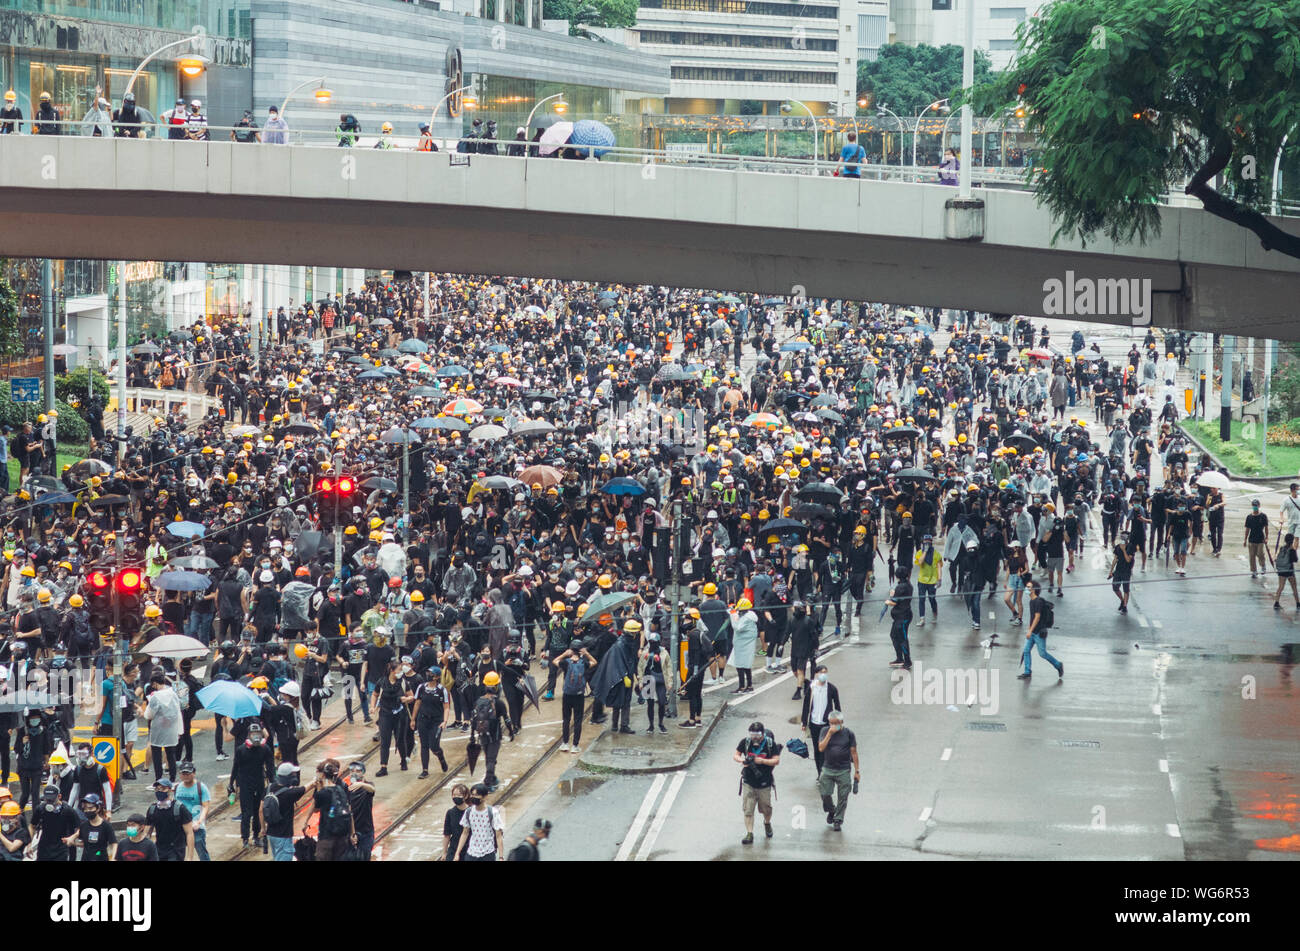 Hong Kong, 31 Aug 2019 - Hong Kong protest crowd as black bloc in Admiralty Stock Photo